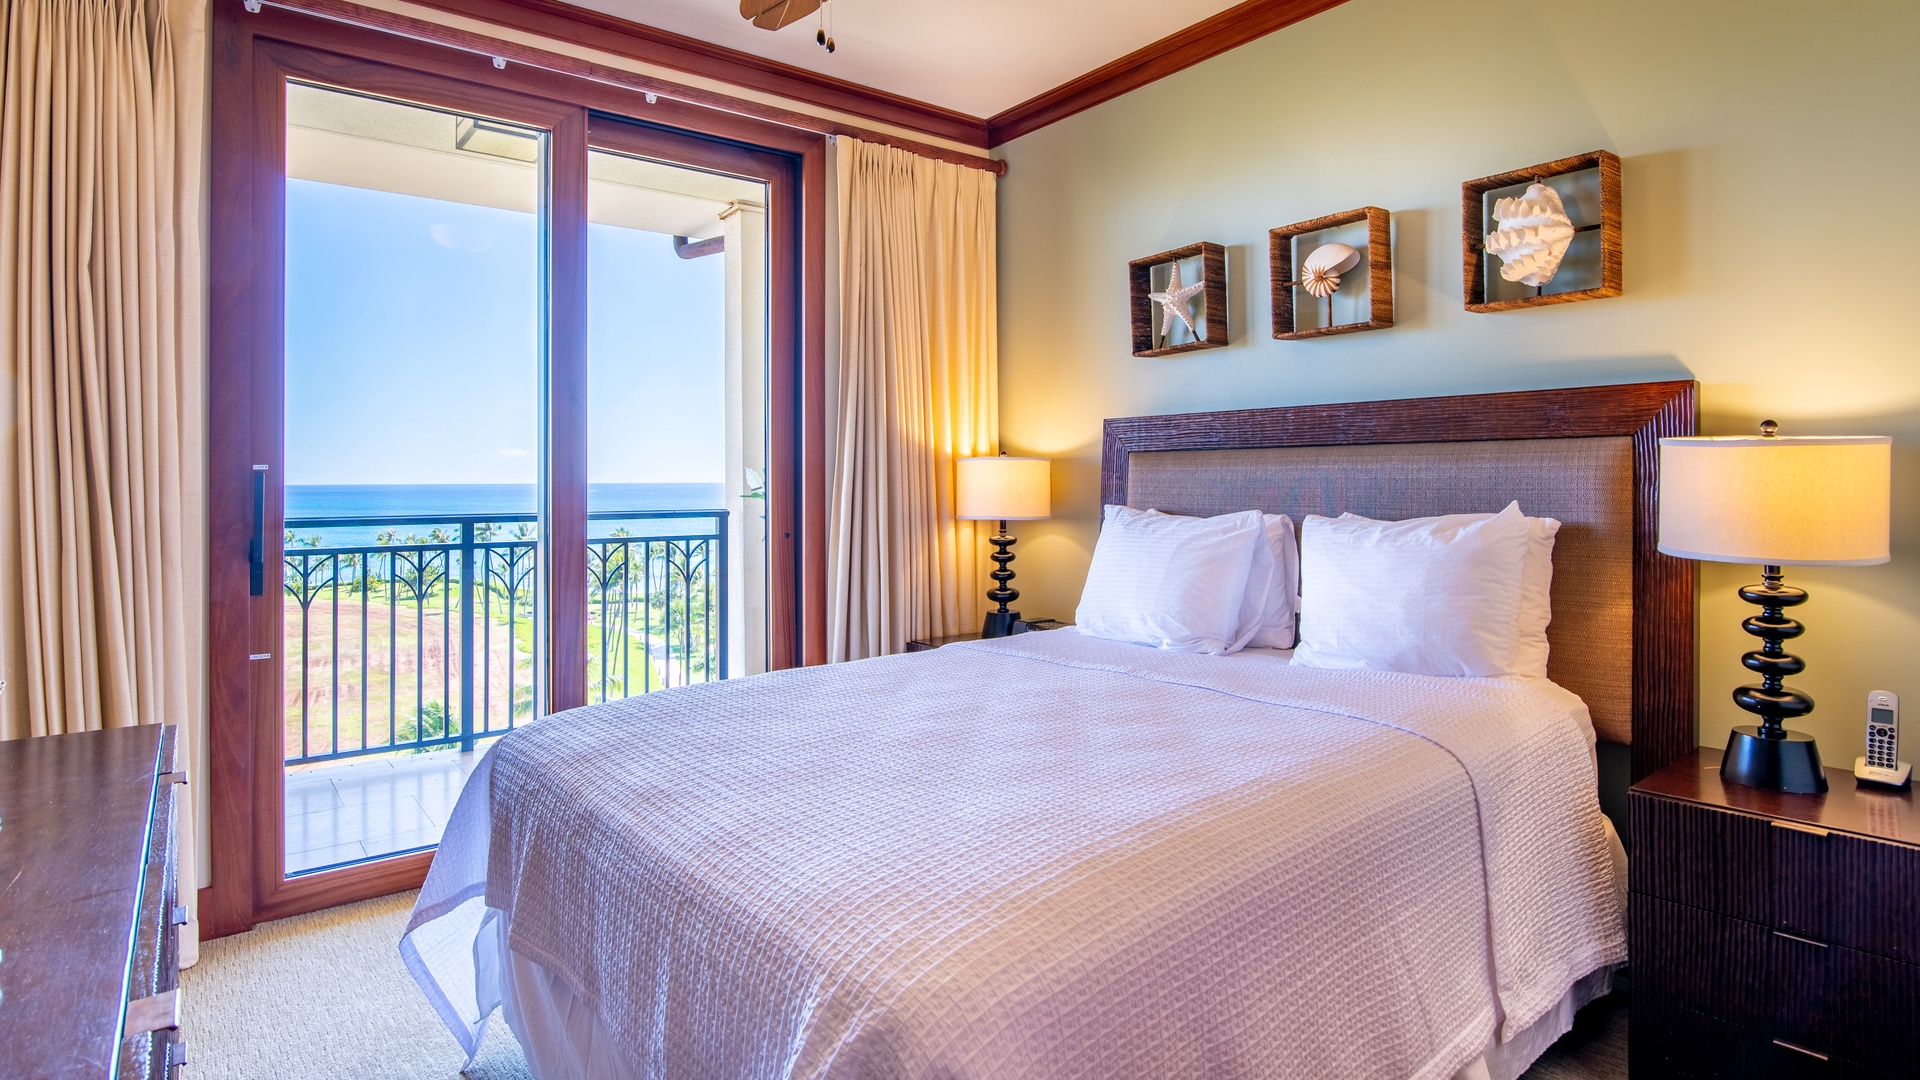 Kapolei Vacation Rentals, Ko Olina Beach Villas B901 - The second guest bedroom has a queen bed with lanai access, perfect for a restful sleep.